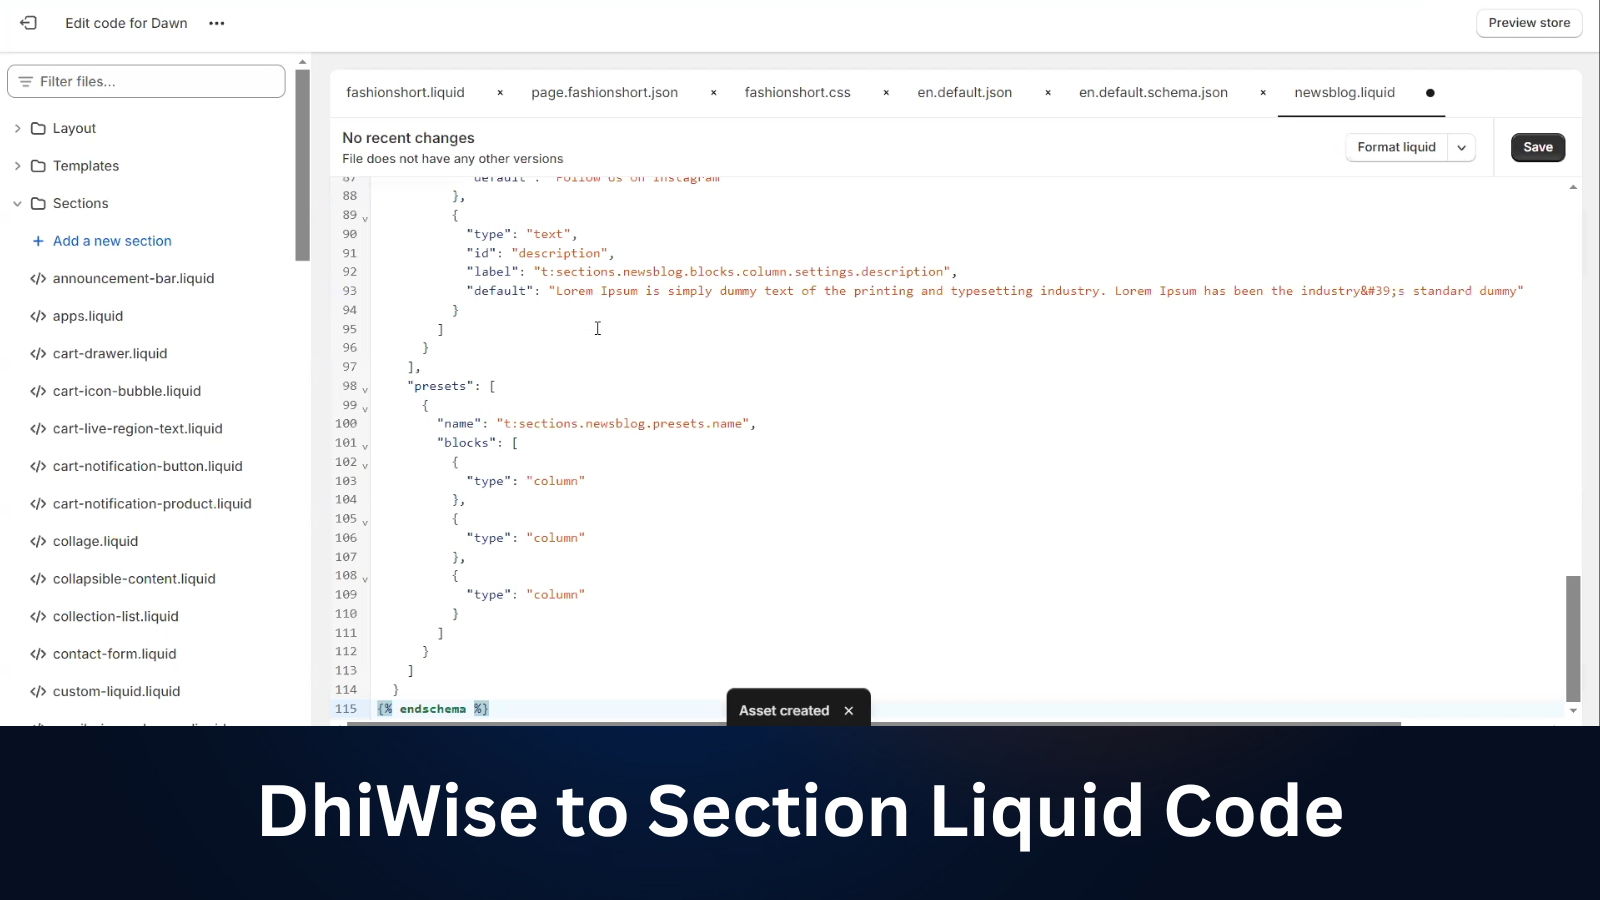 Section Liquid code generated by DhiWise